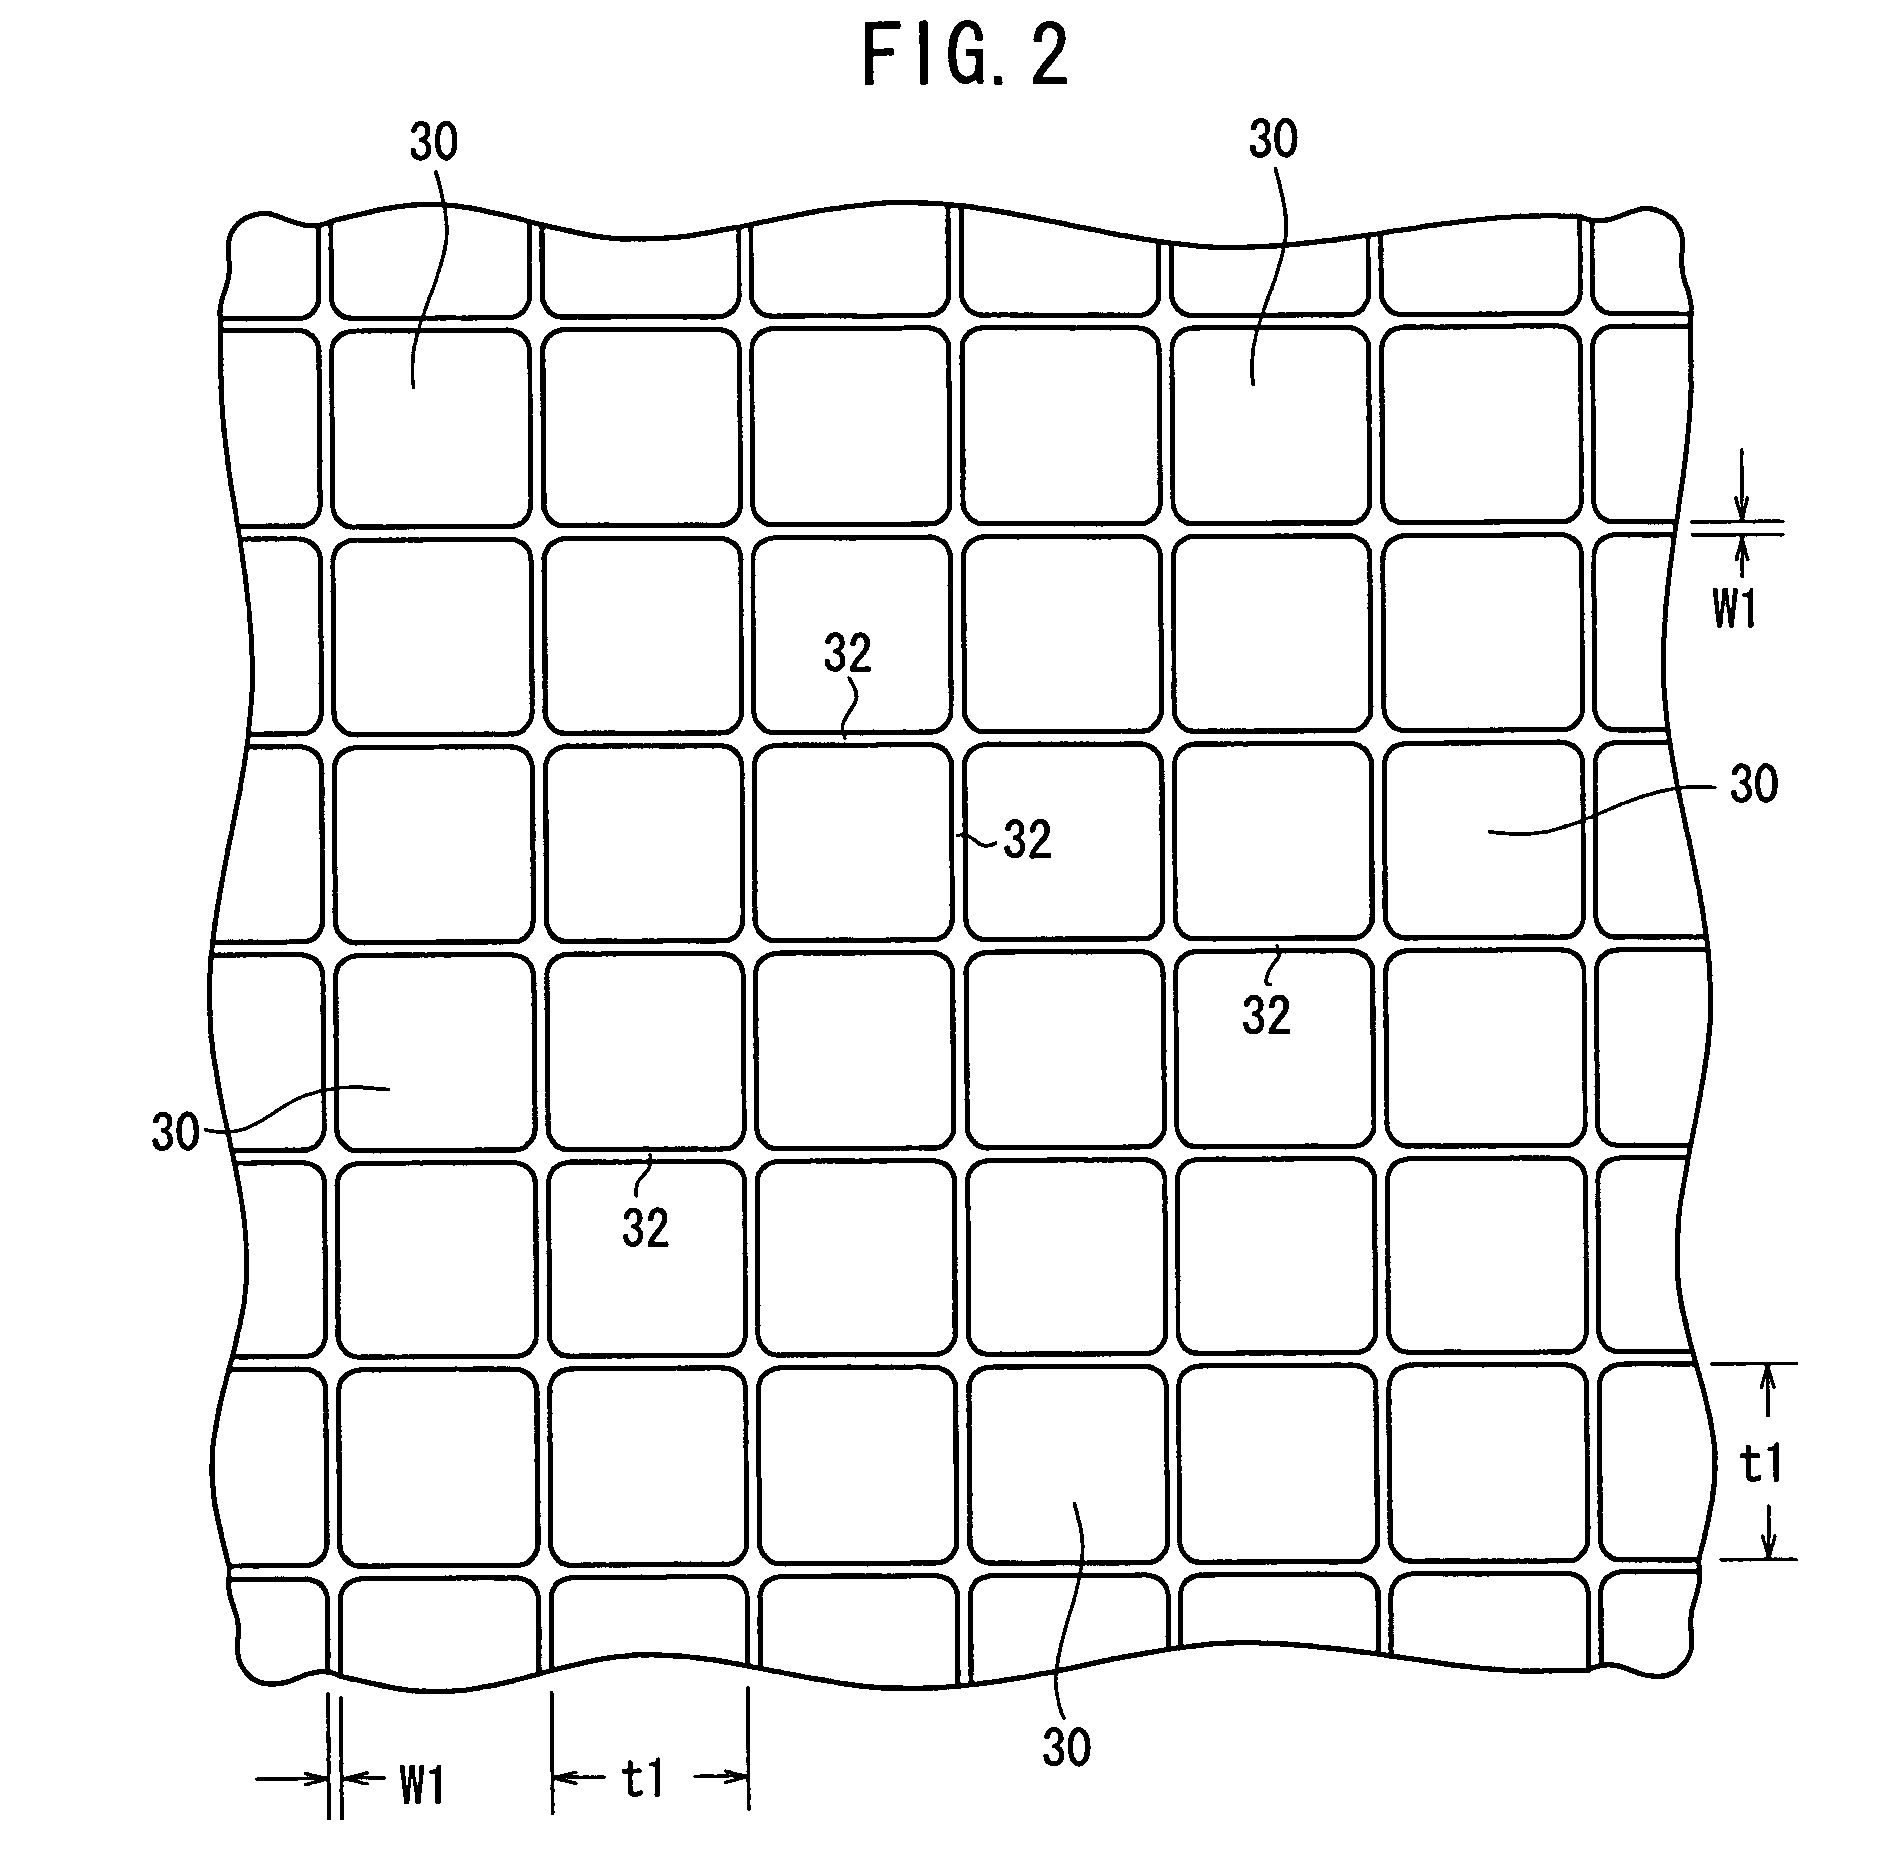 Hydrogen absorbing material, method for producing the same, and hydrogen storage container